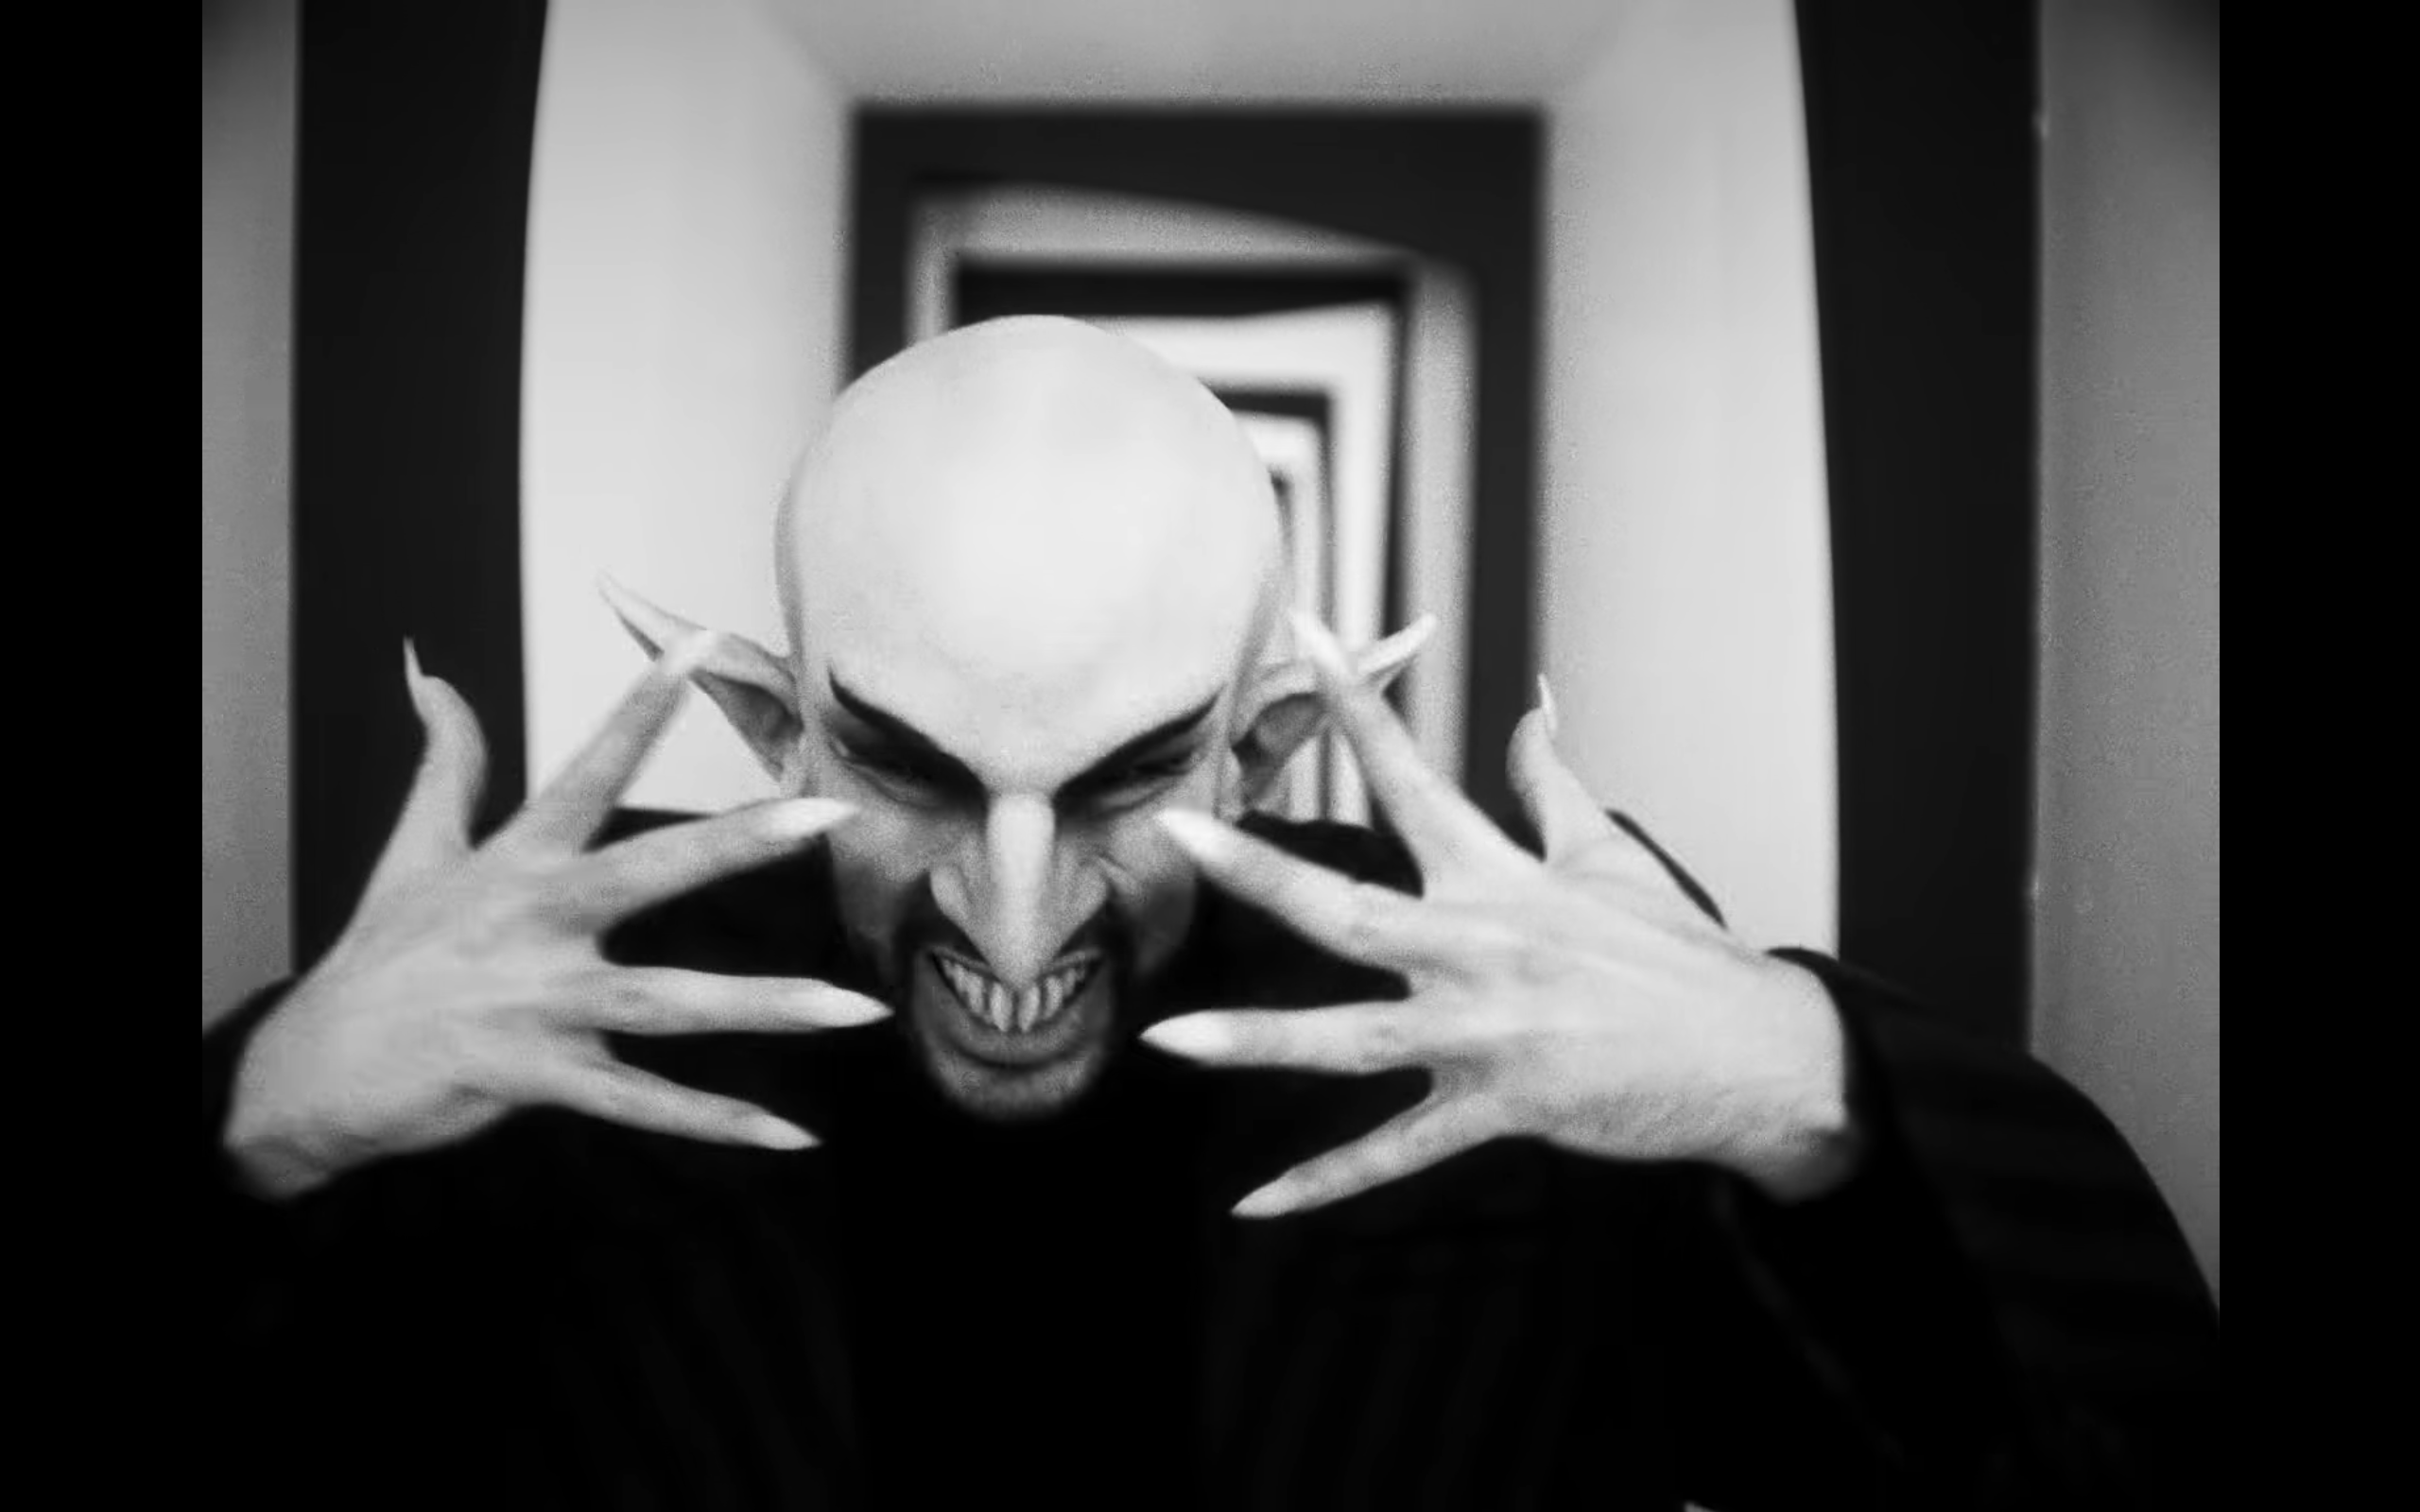 BBBaticano.png: Frame of Bad Bunny dressed as Nosferatu and wearing long nails in his music video “BATICANO.” Via Bad Bunny’s YouTube.